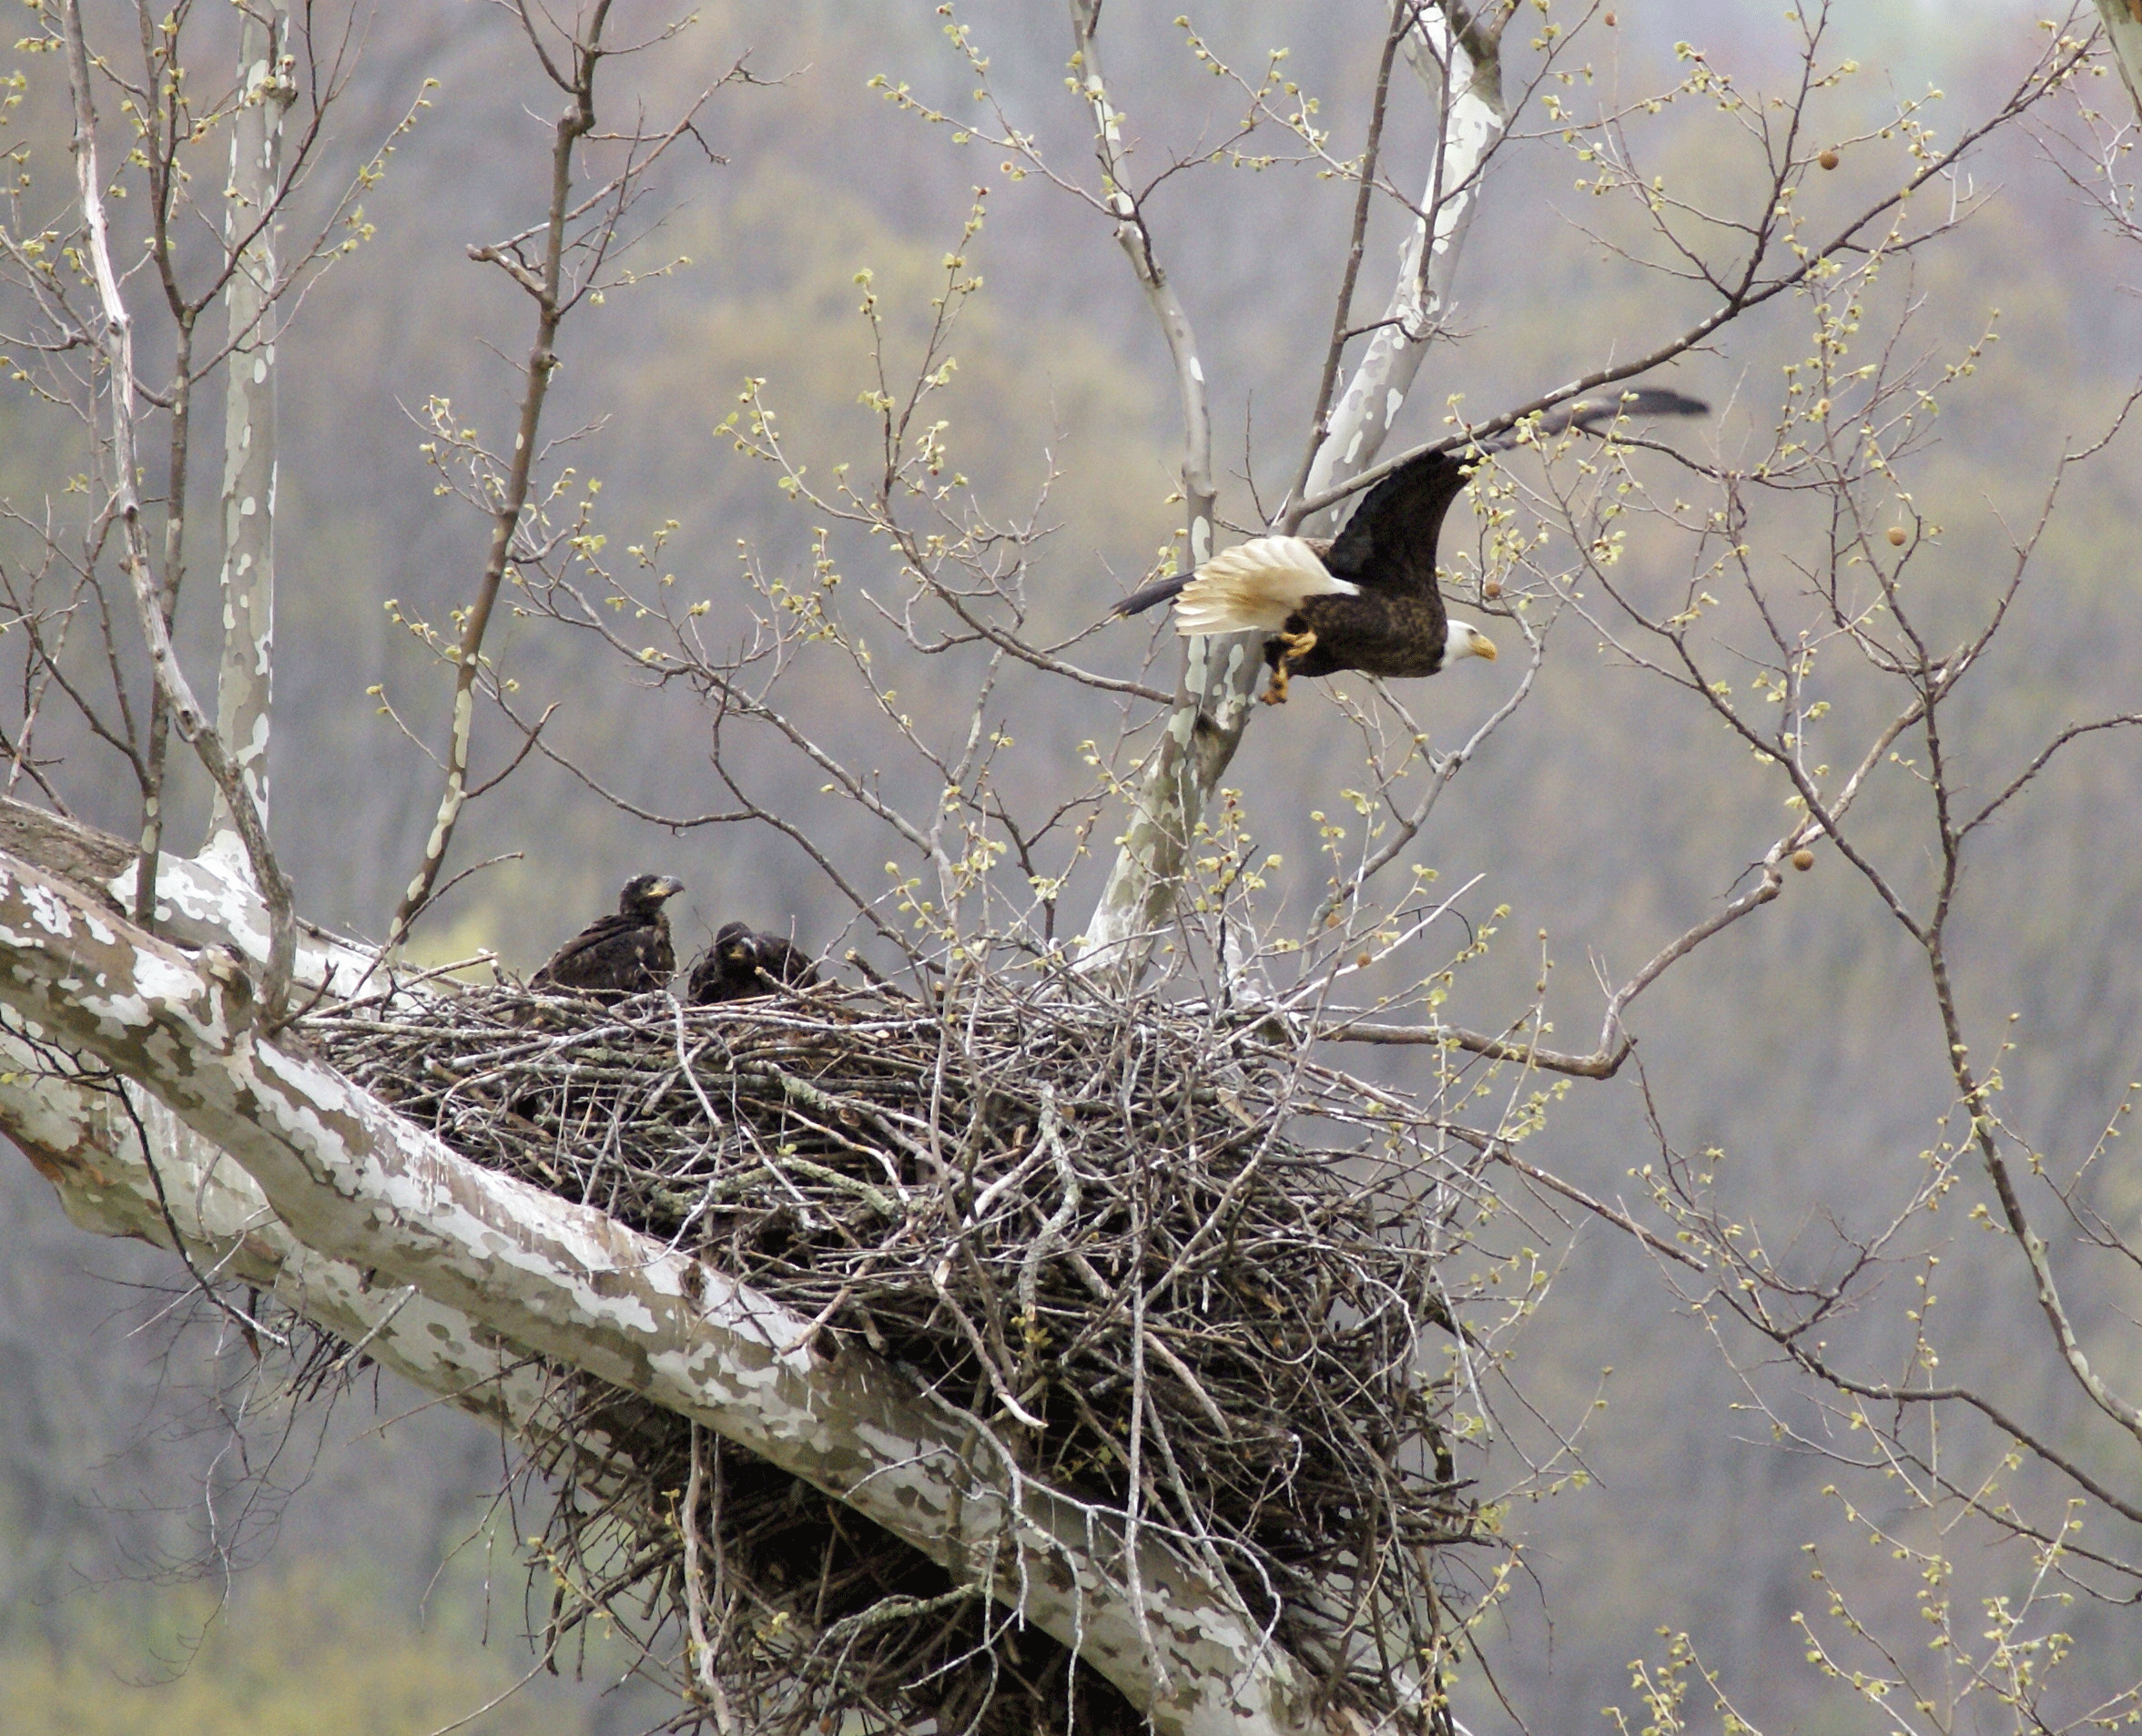 Adult bald eagle over nest with chicks